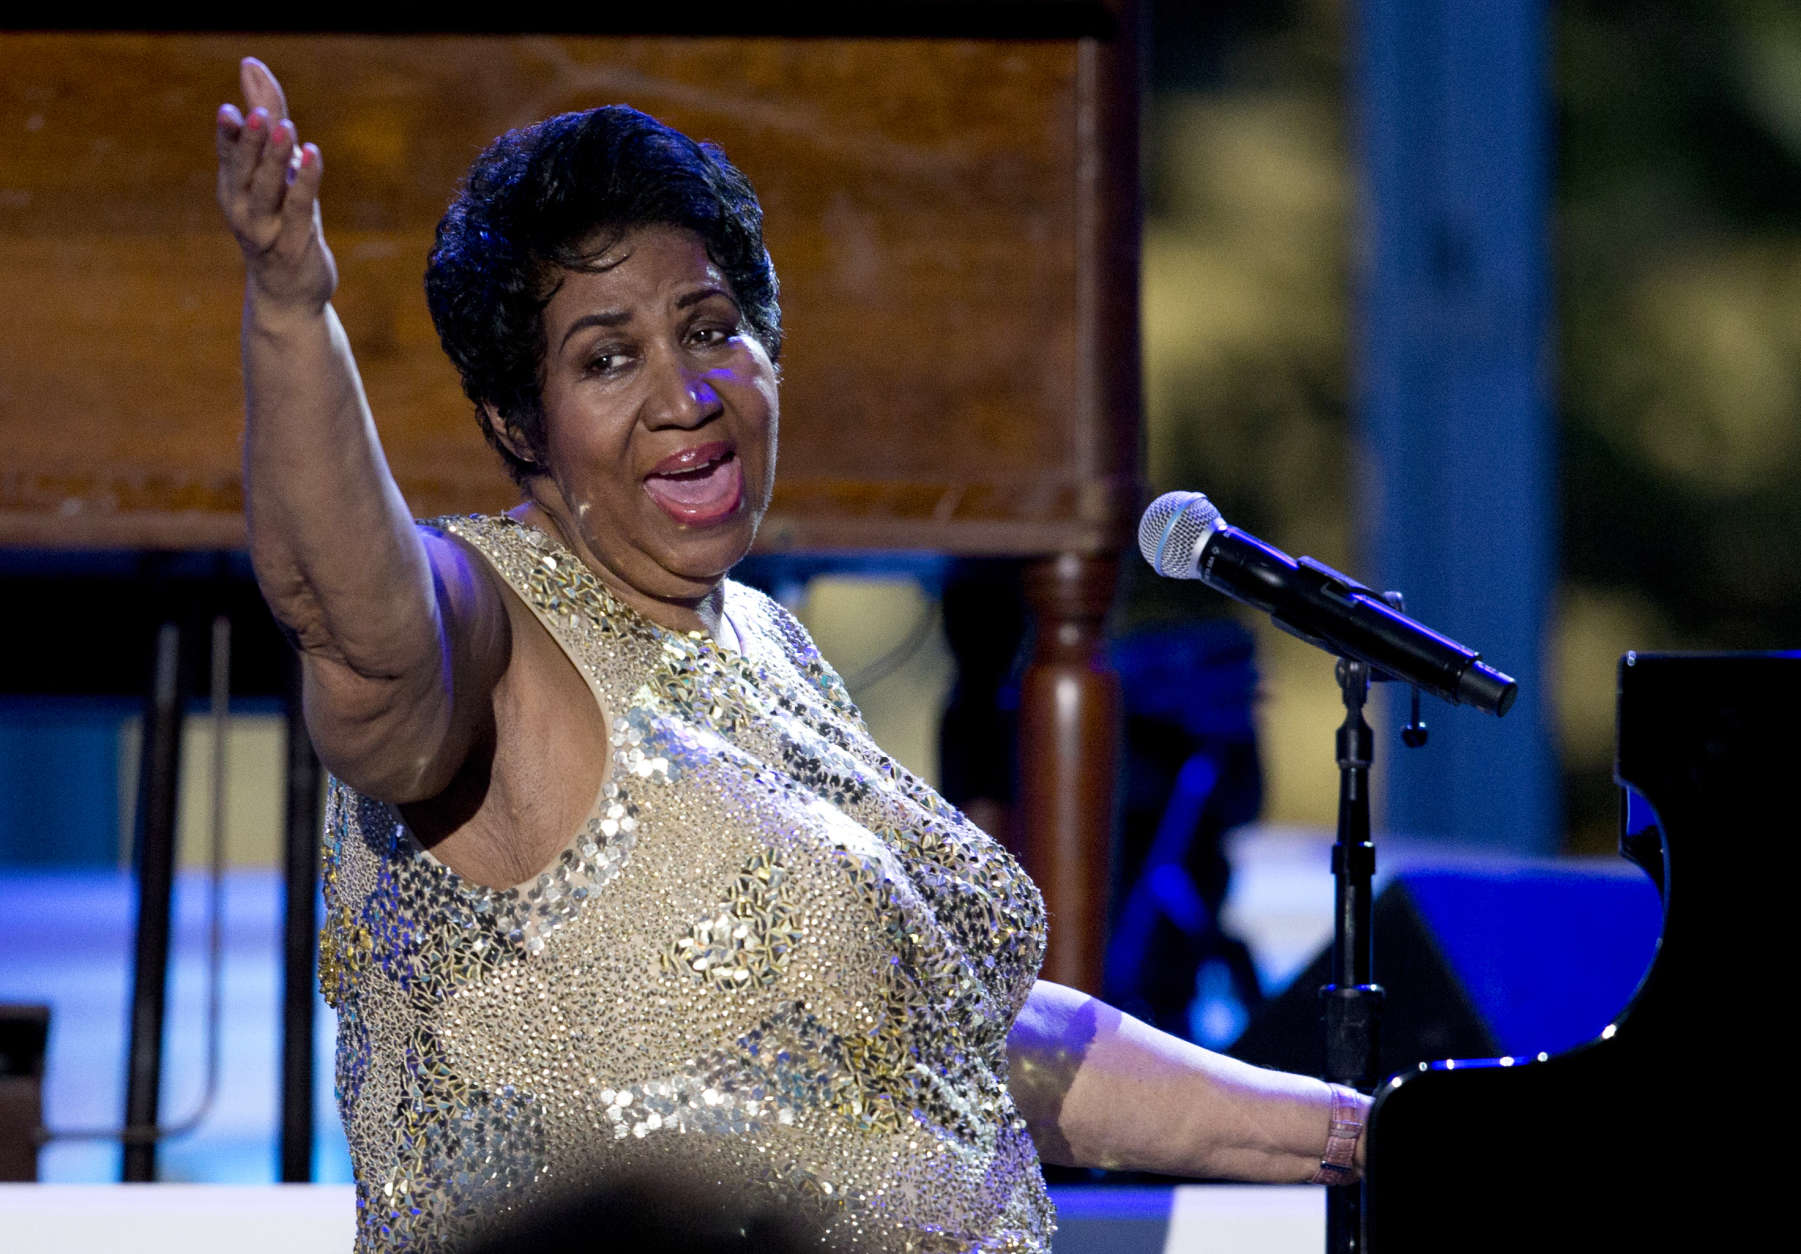 Singer Aretha ranklin is 75 on March 25. (AP Photo/Carolyn Kaster, File)